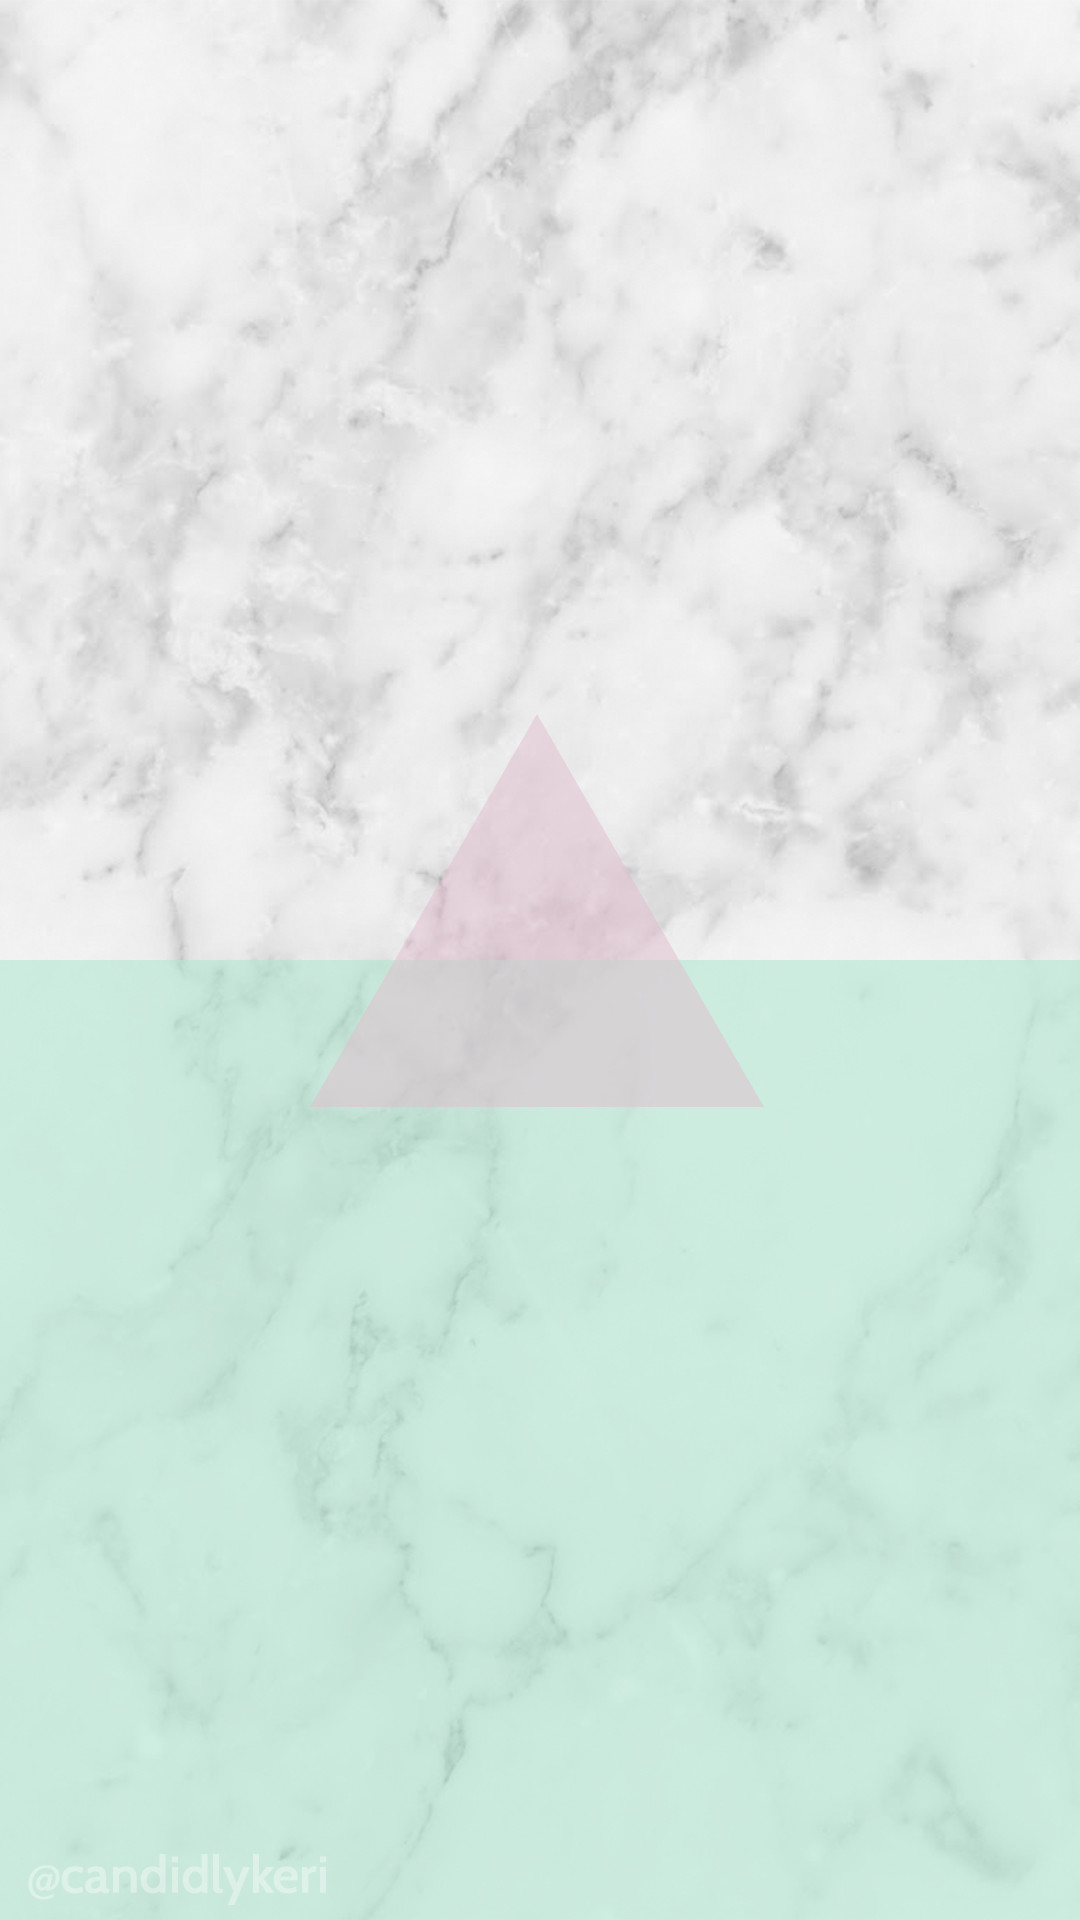 1080x1920 Granite Pink Green Triangle background wallpaper you can download for free  on the blog! For